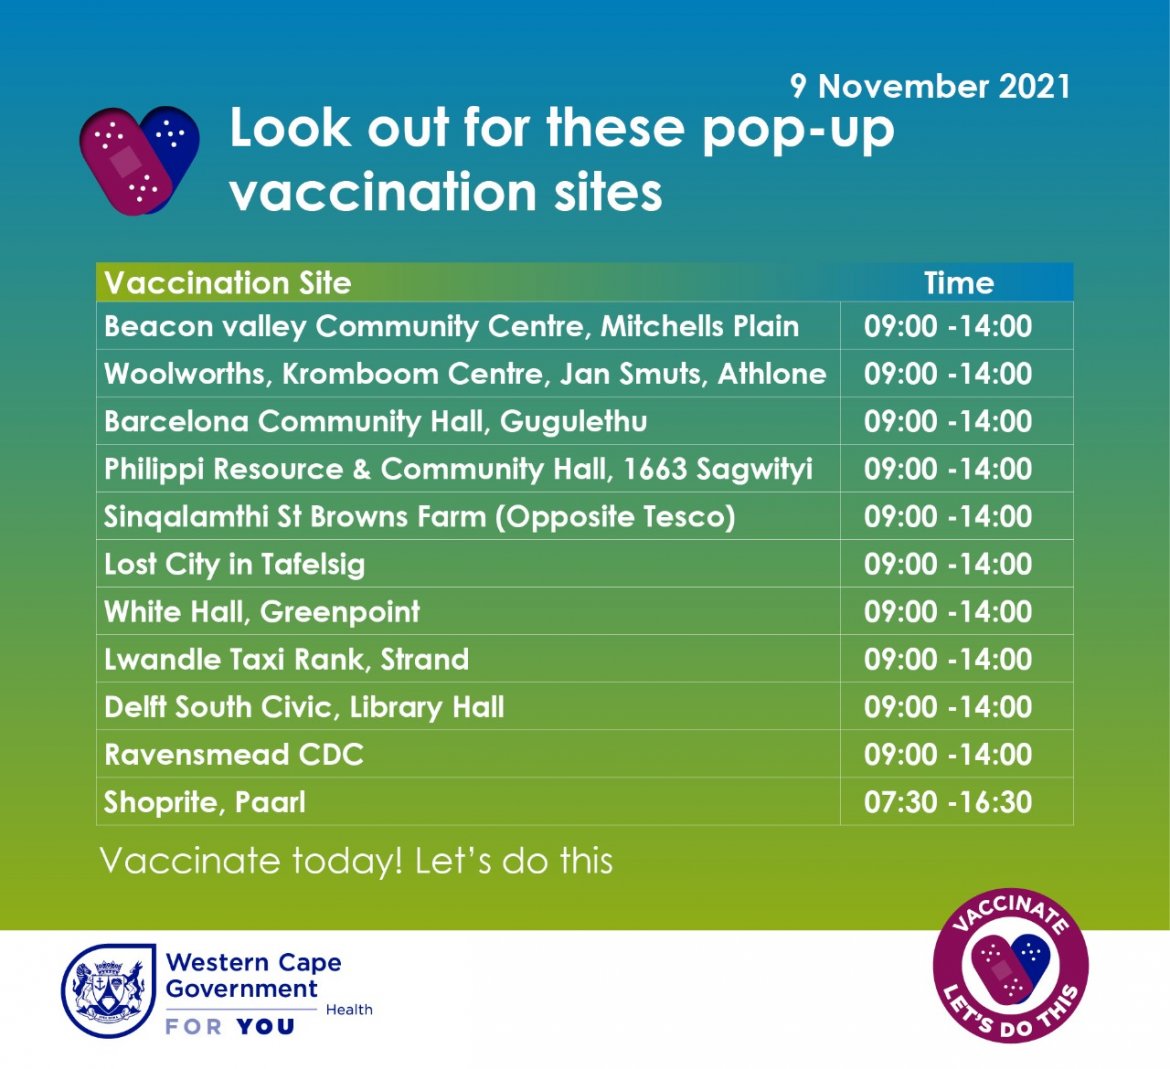 Pop-up vaccination sites will be open today 9th November 2021 FDvFvDRX0AIfNlh.jpg